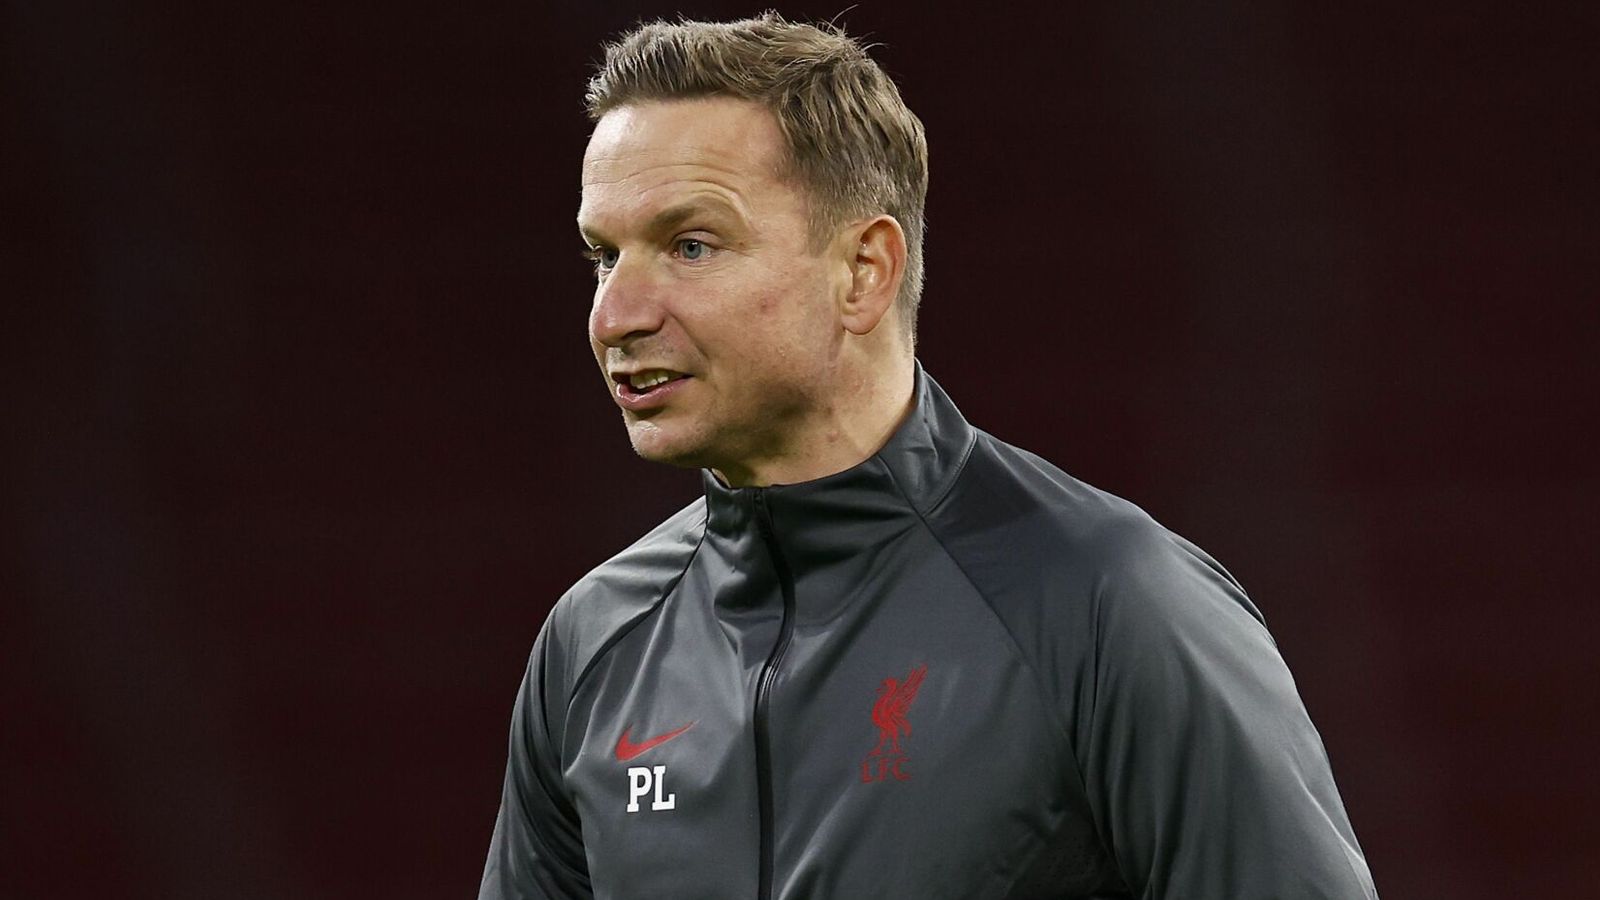 Liverpool Carabao Cup game with Arsenal in further doubt as Pep Lijnders tests positive for Covid